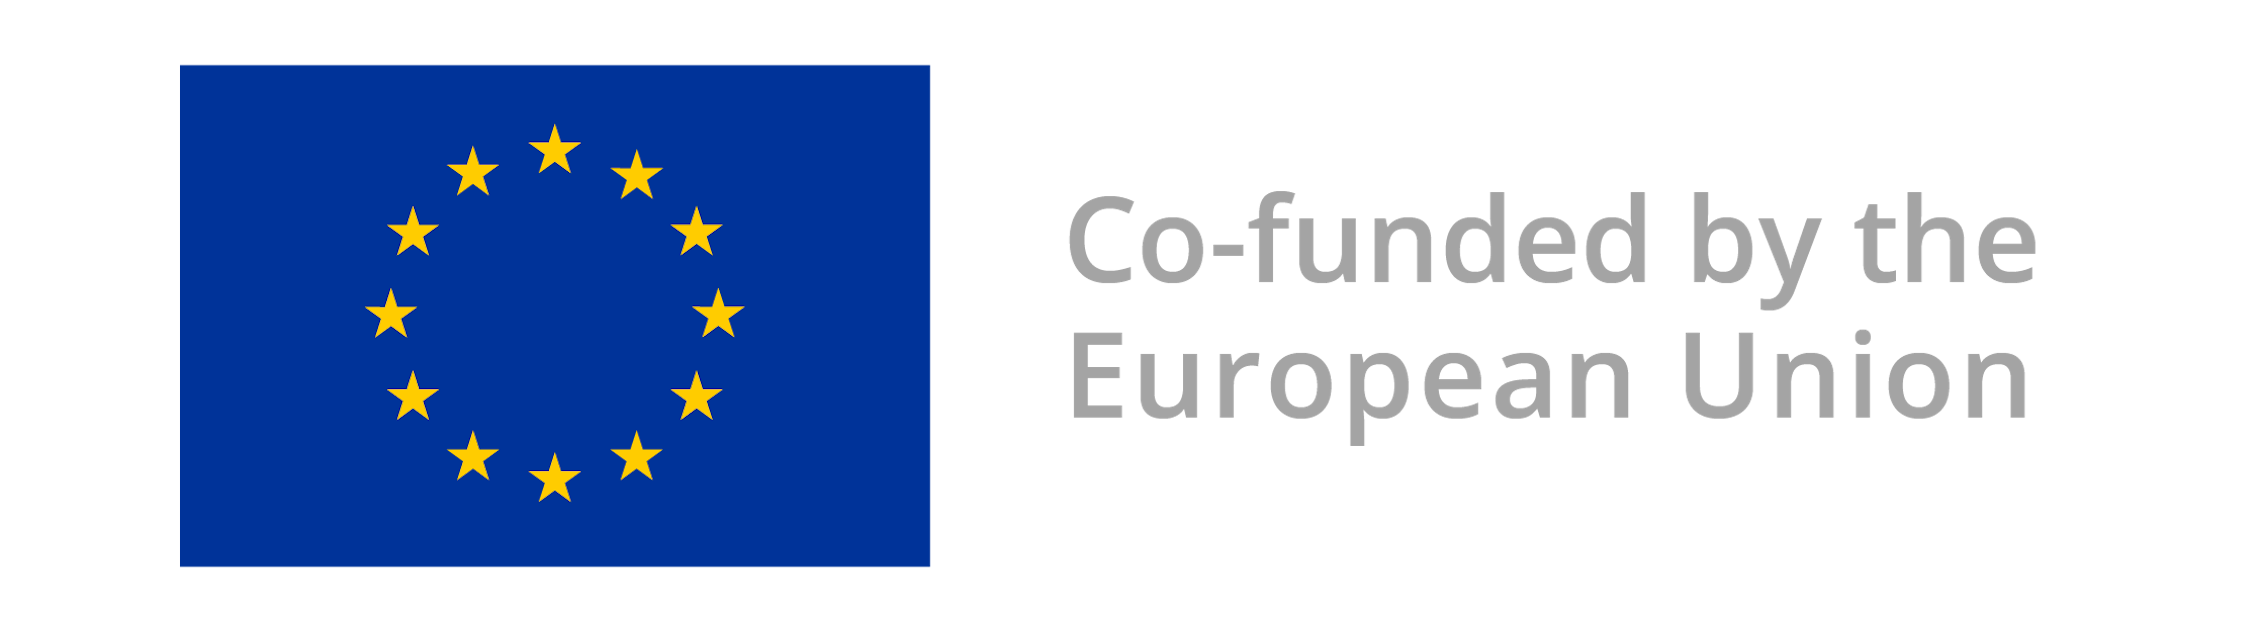 European Union Flag with text on the right that says co-funded by the European Union